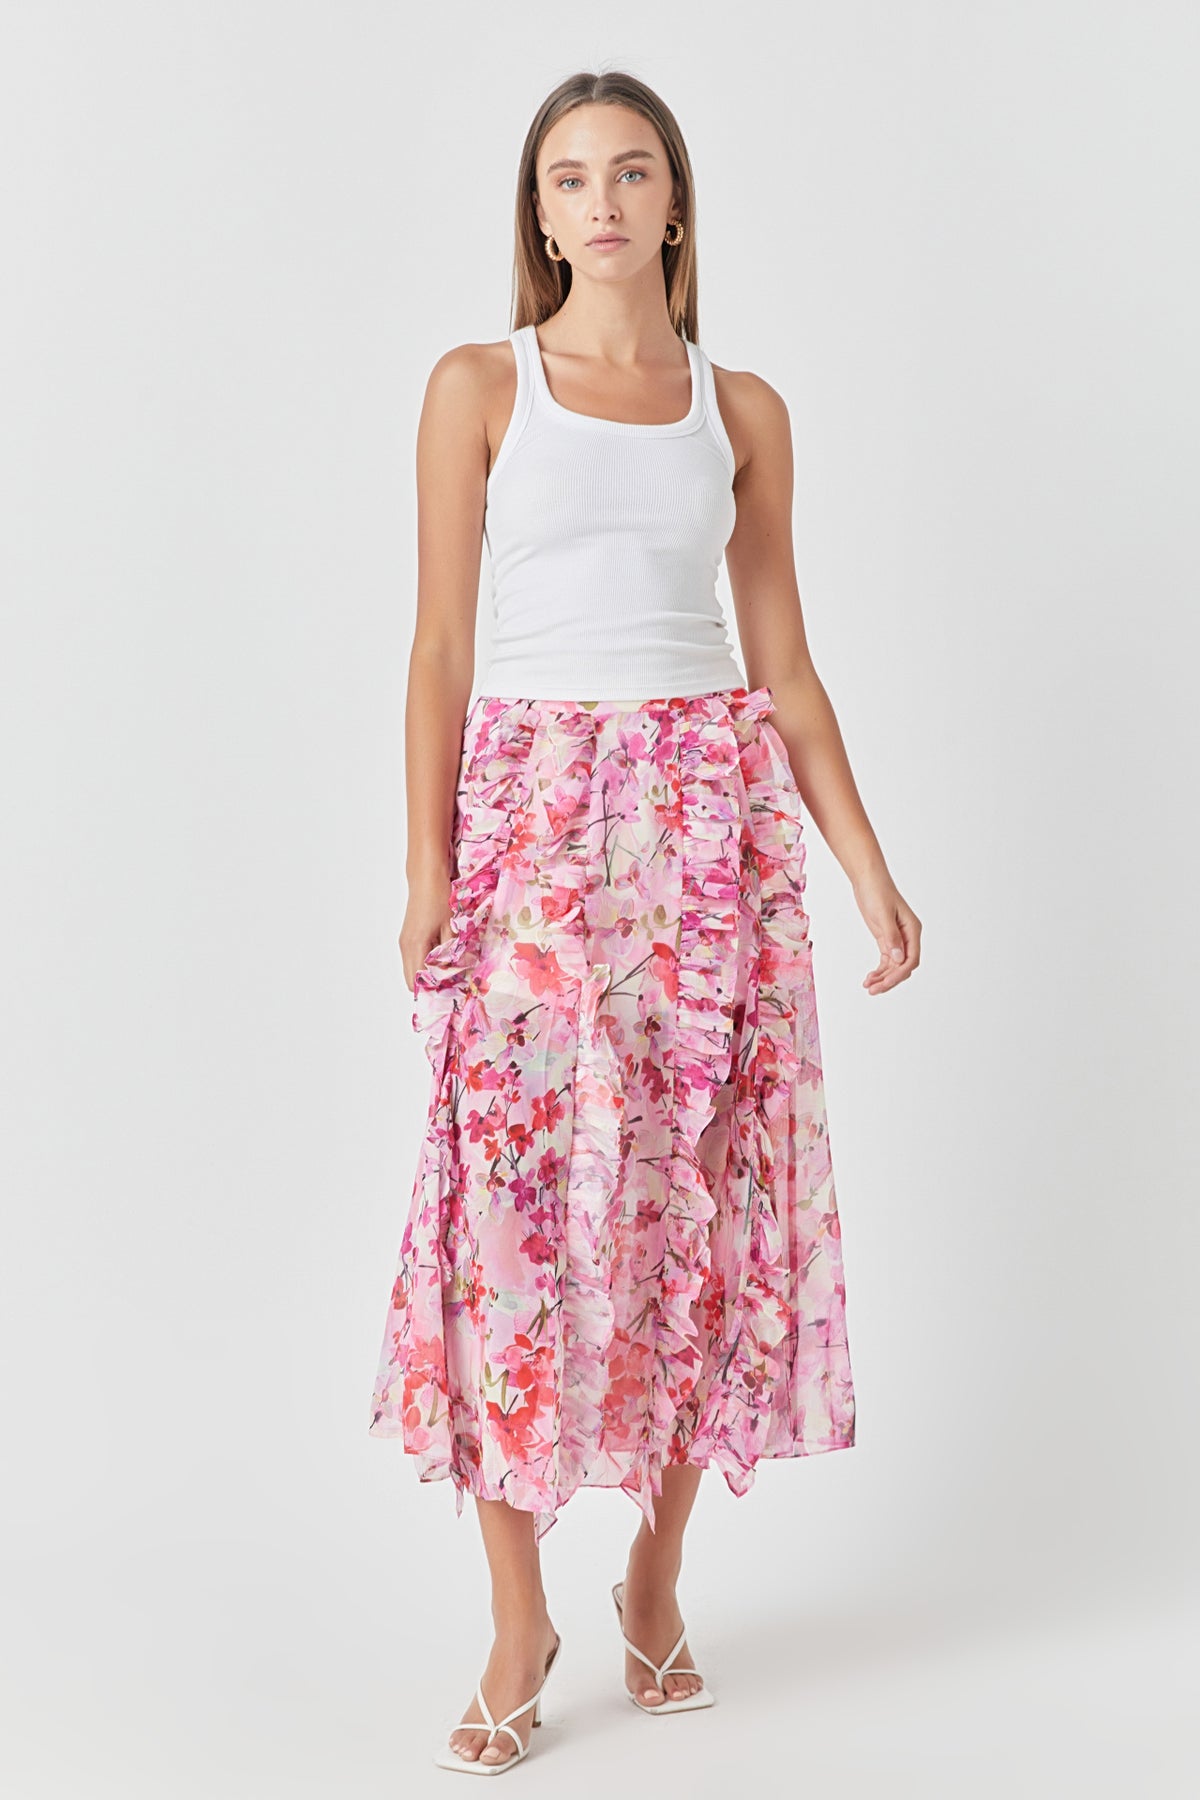 ENDLESS ROSE - Floral Ruffled Maxi Skirt - SKIRTS available at Objectrare